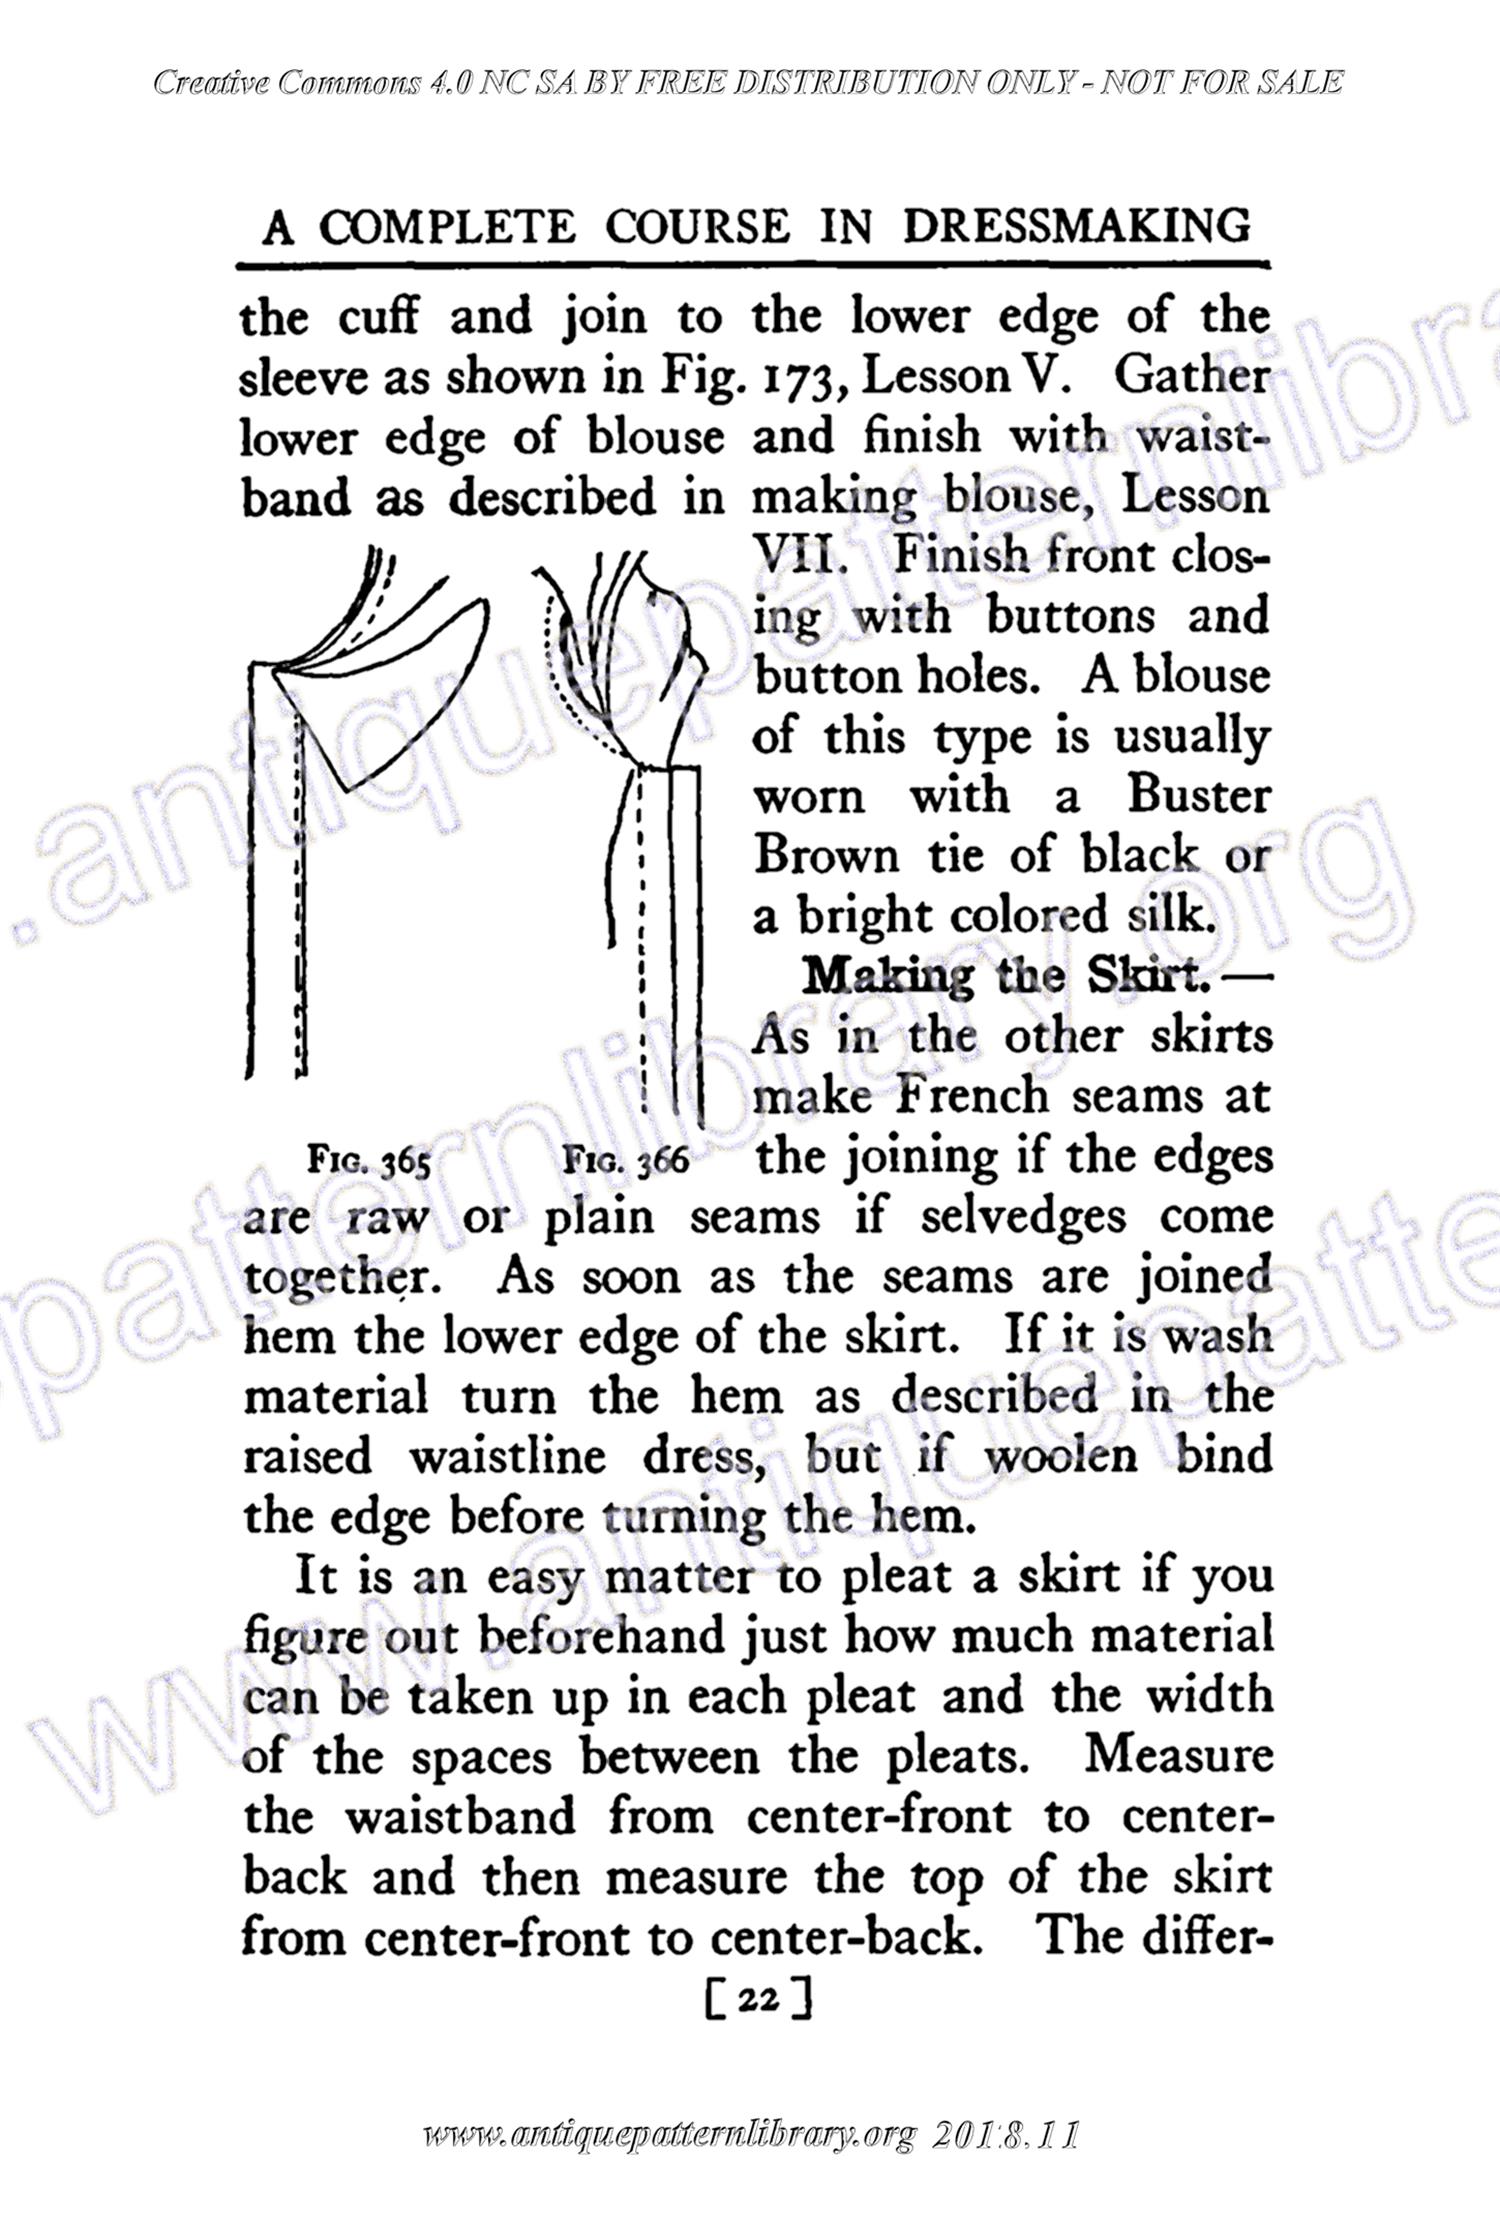 B-YS103 Complete Course in Dressmaking in Twelve Lessons: